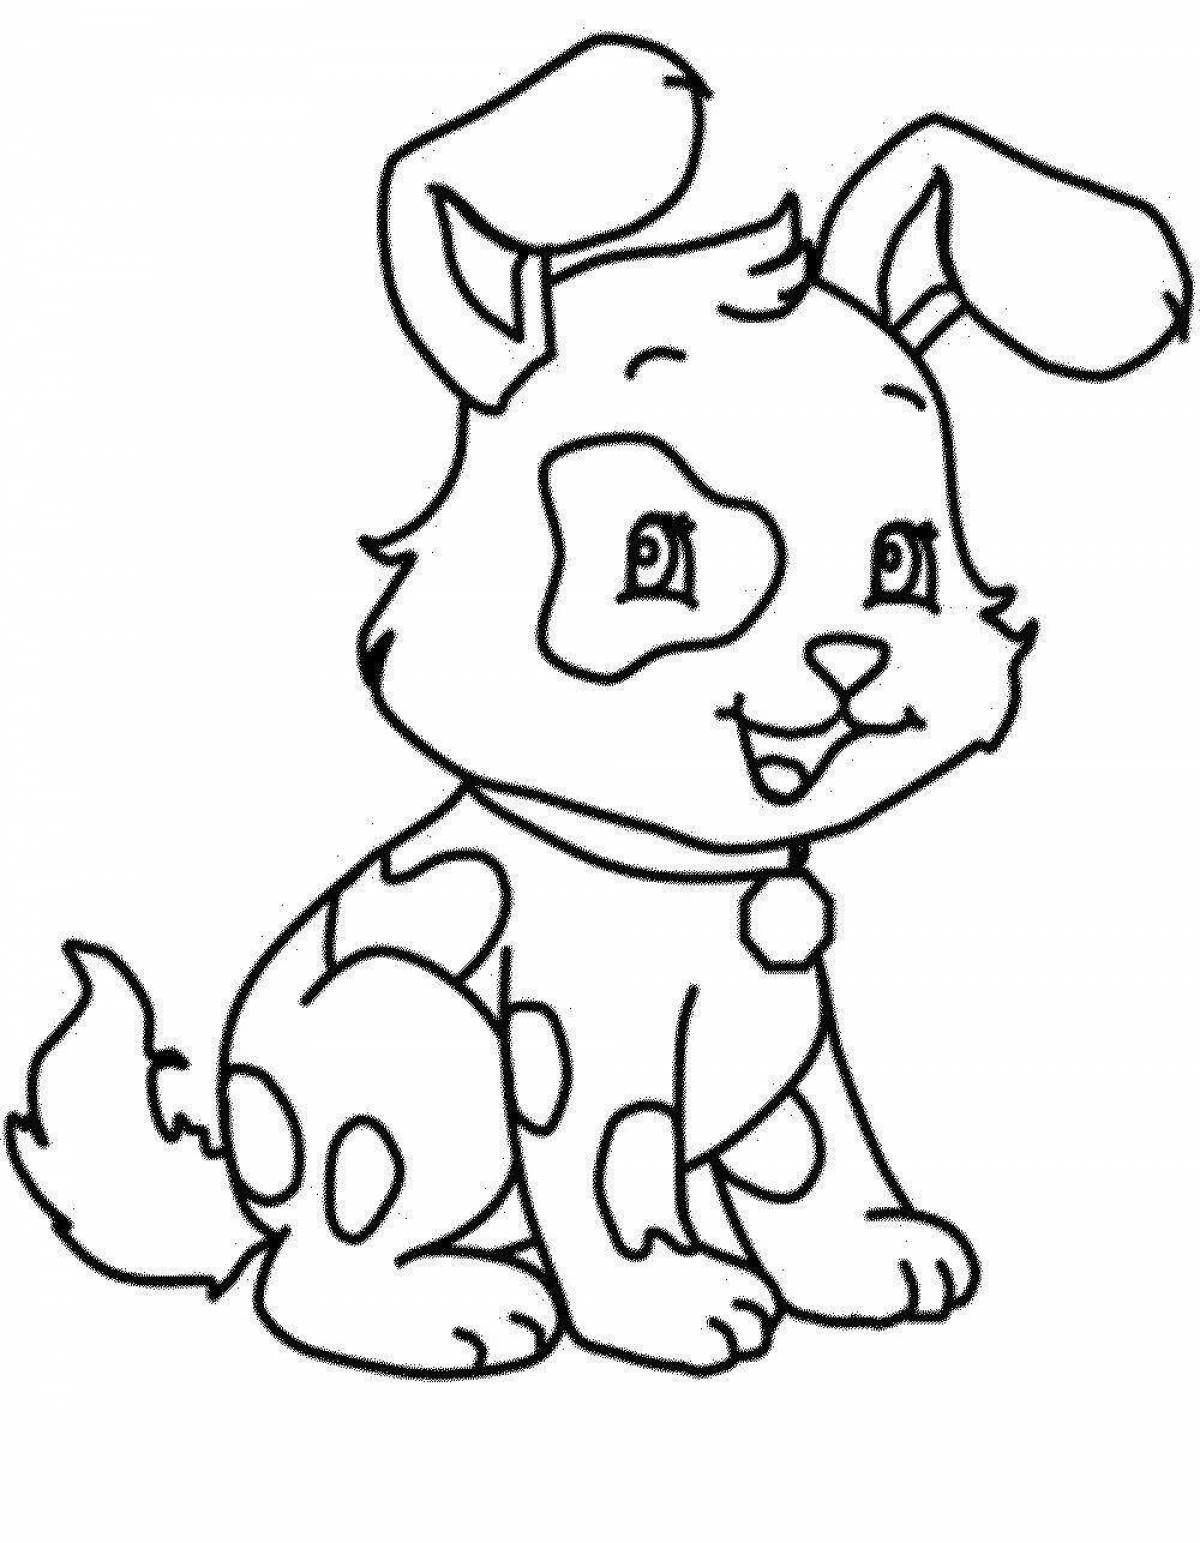 Amazing animal coloring pages for 6-7 year olds